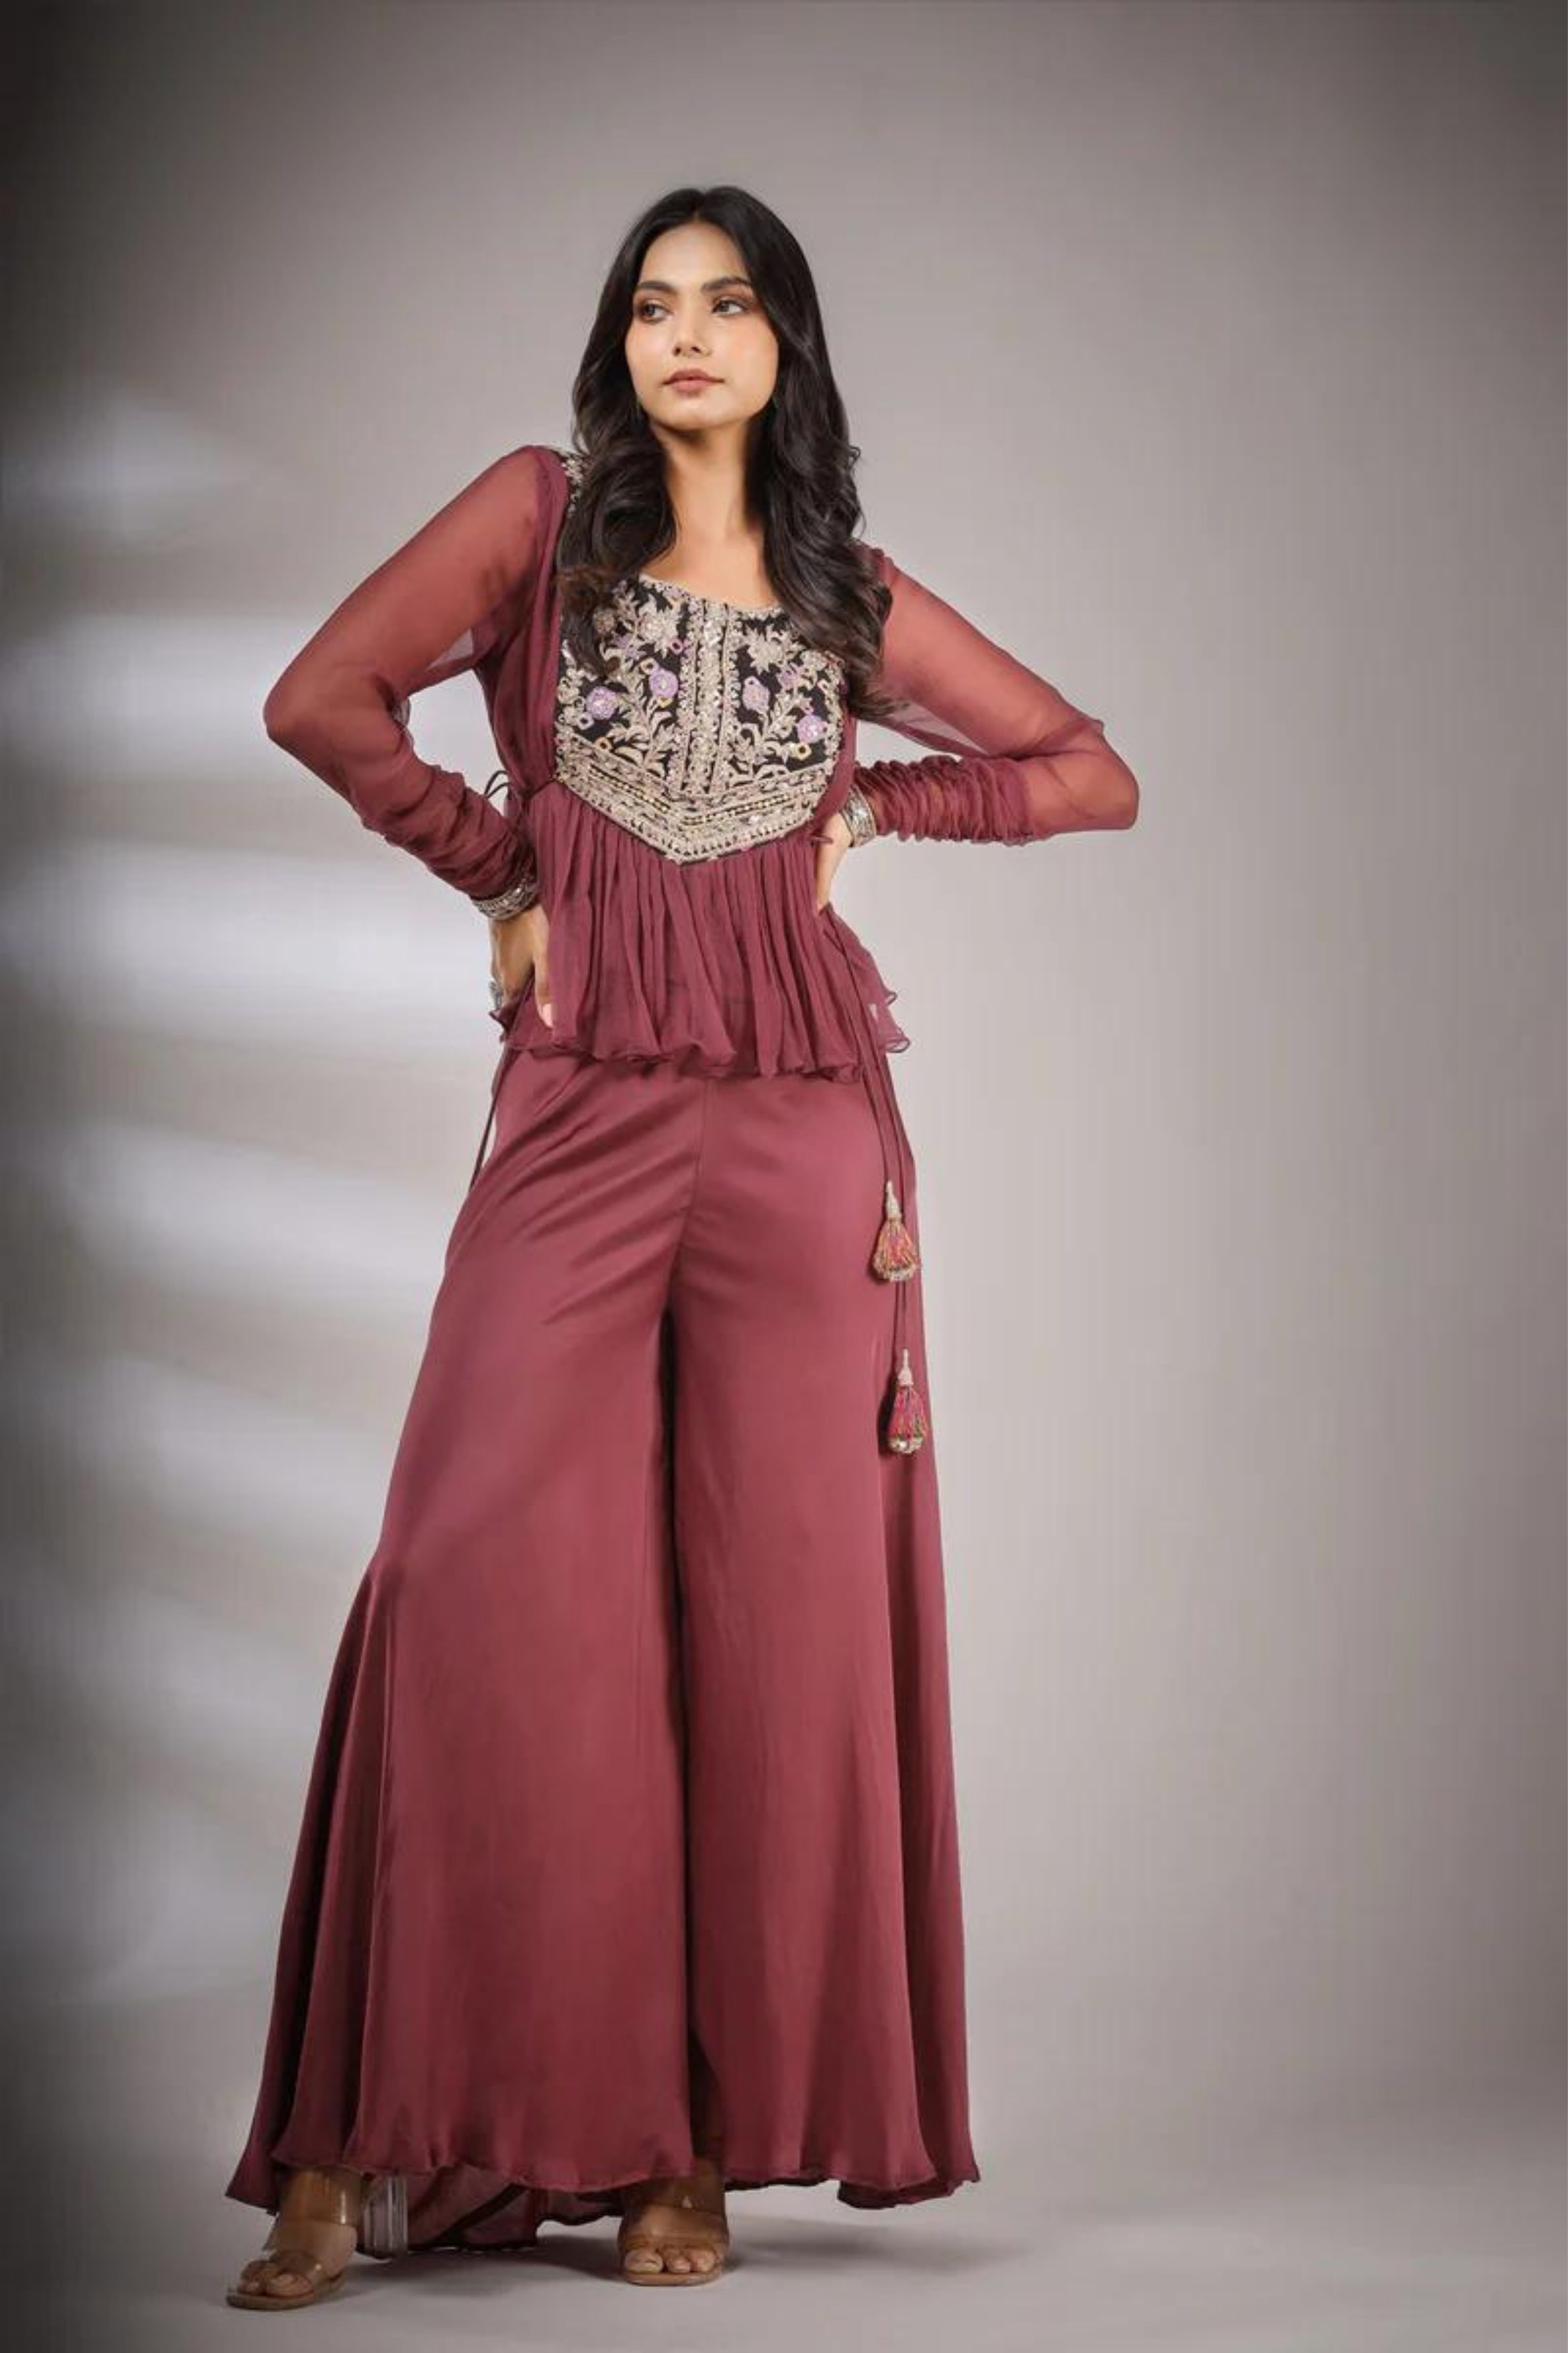 Stylish Fusion Gowns To Rock Evening Parties | by Like A Diva | Medium